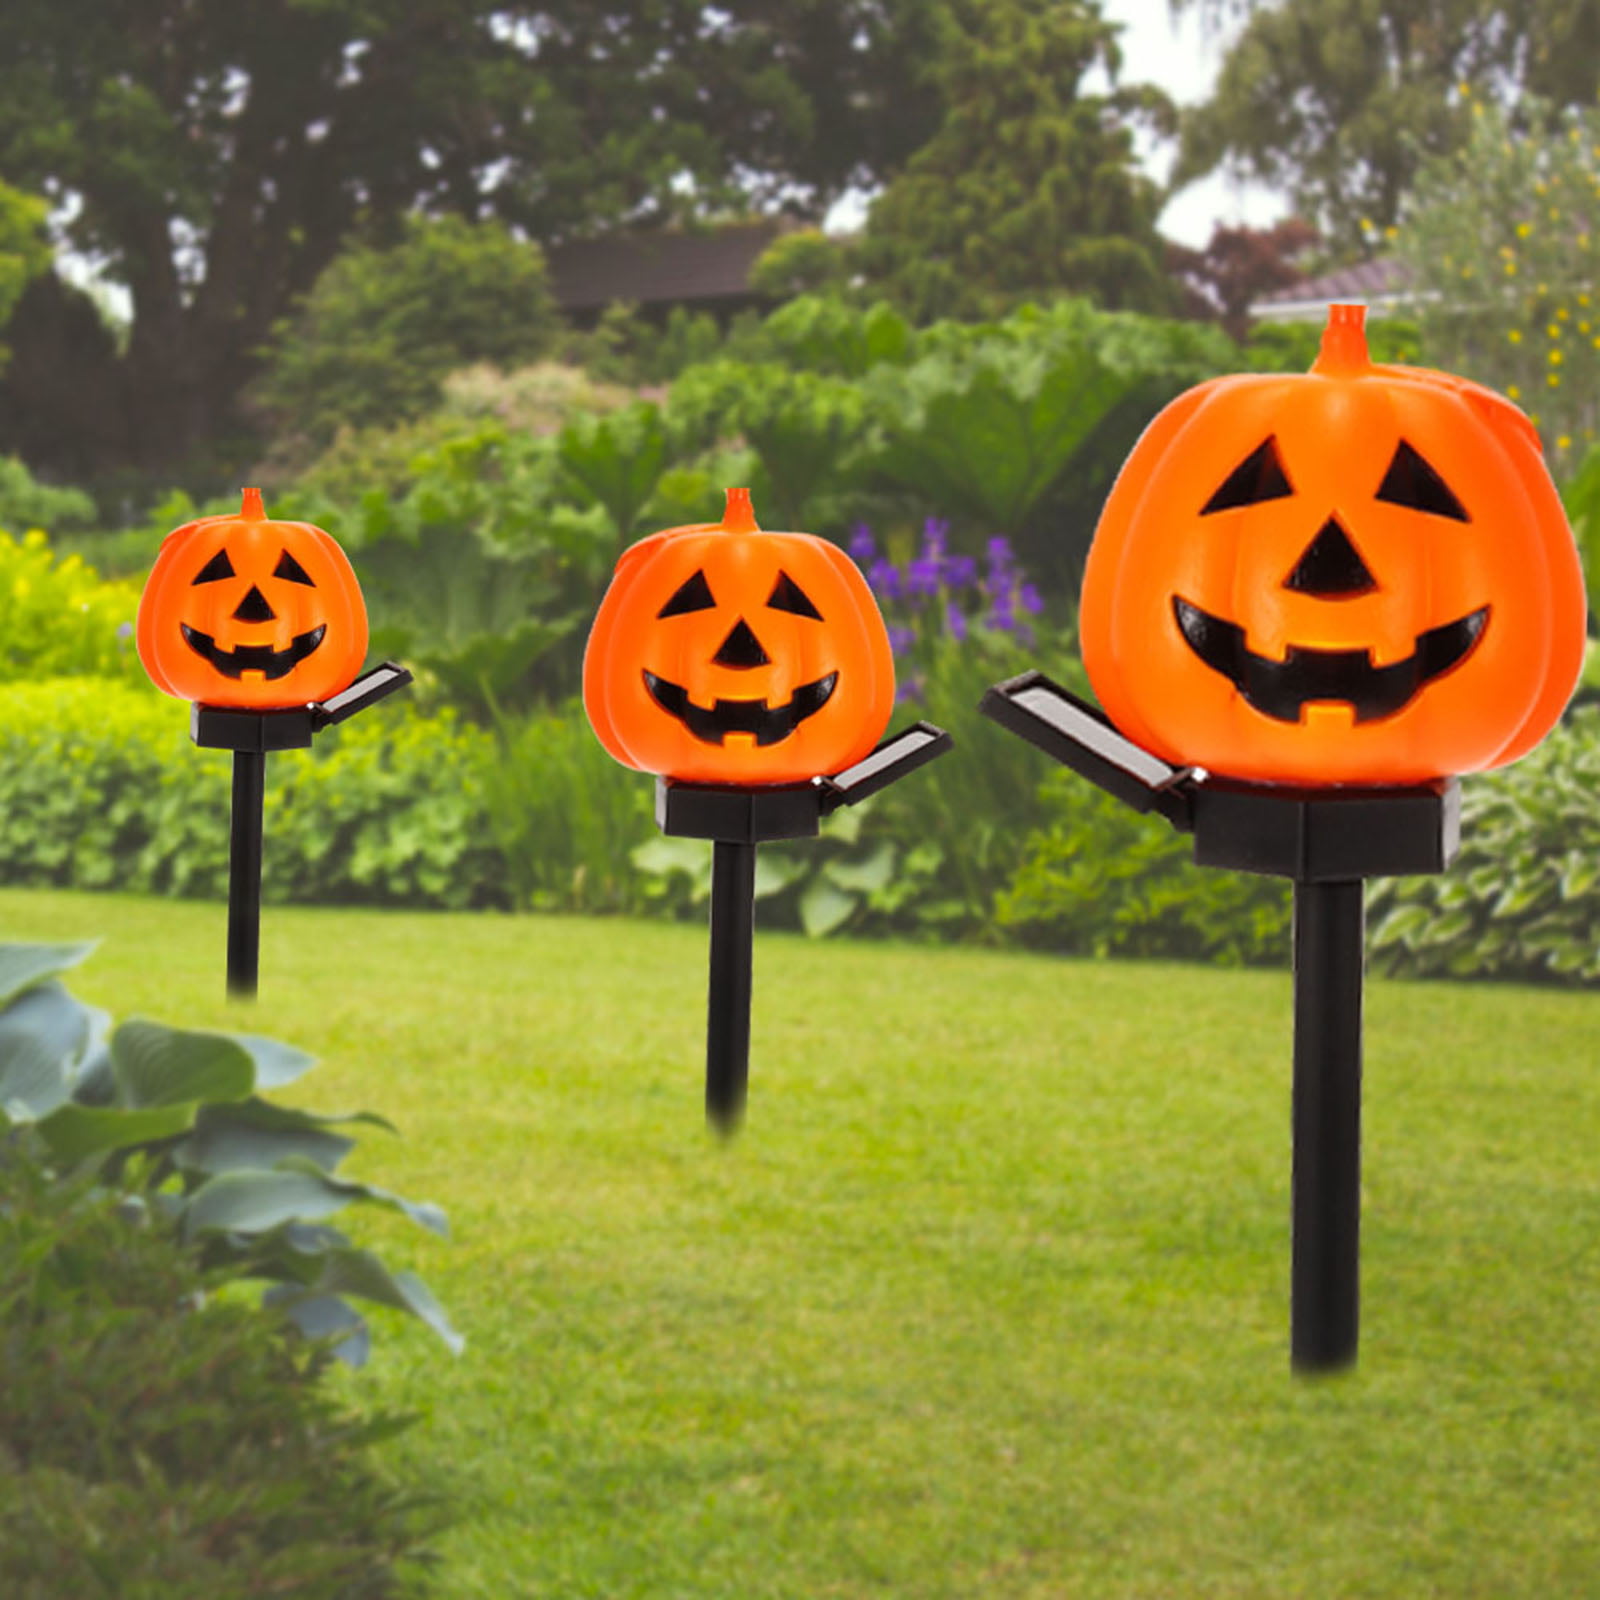 Details about   Halloween 6 plastic Pumpkins Solar Stake Lights Outdoor yard decorations New 